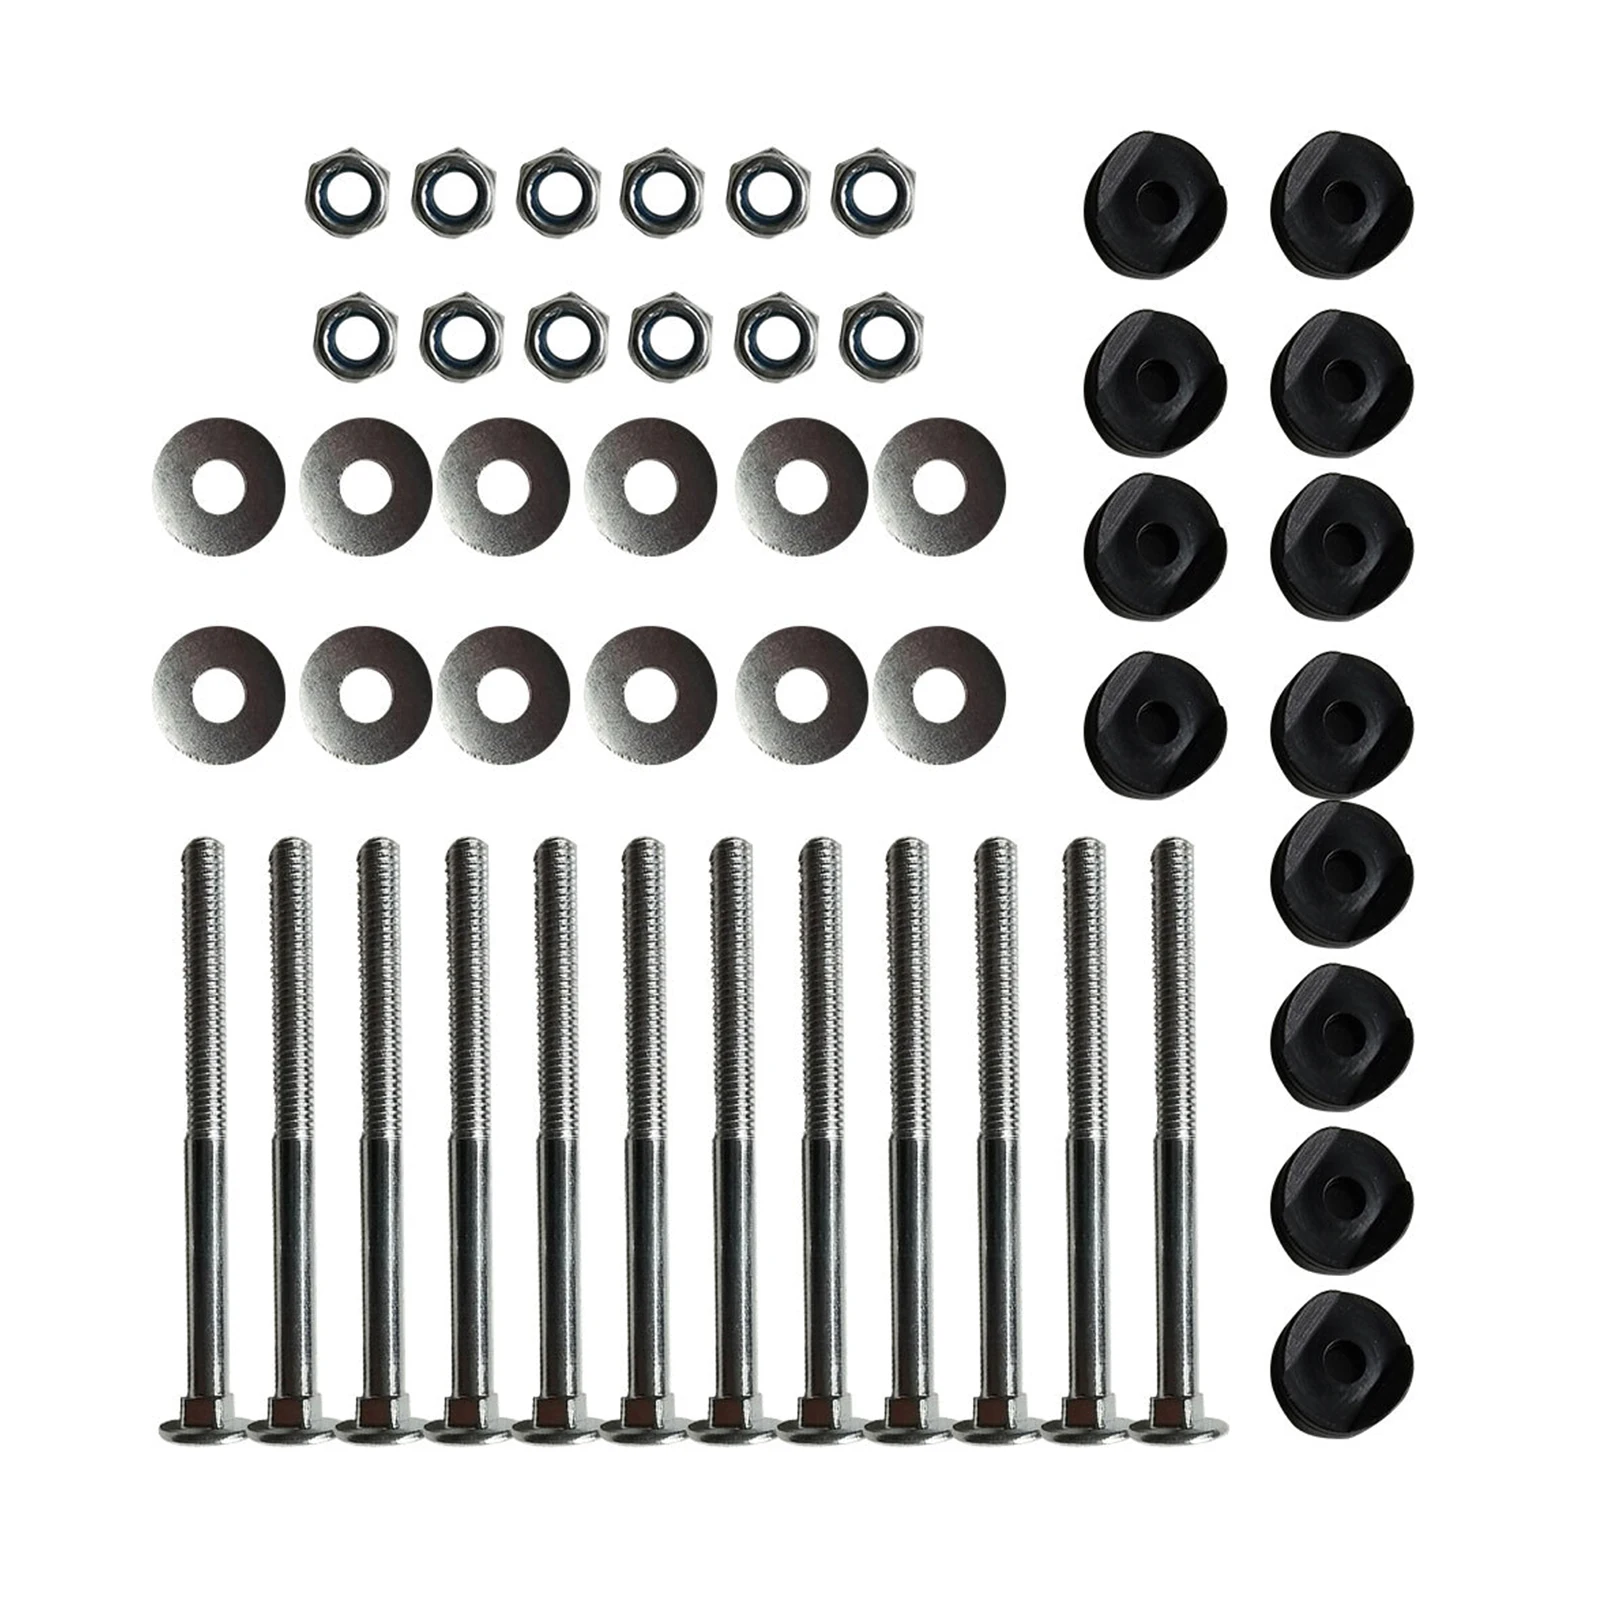 

12pcs Strong Trampoline Screws Set For Attaching The Trampoline High Quality Trampoline Fixing Screws Kit Stability Tool Set